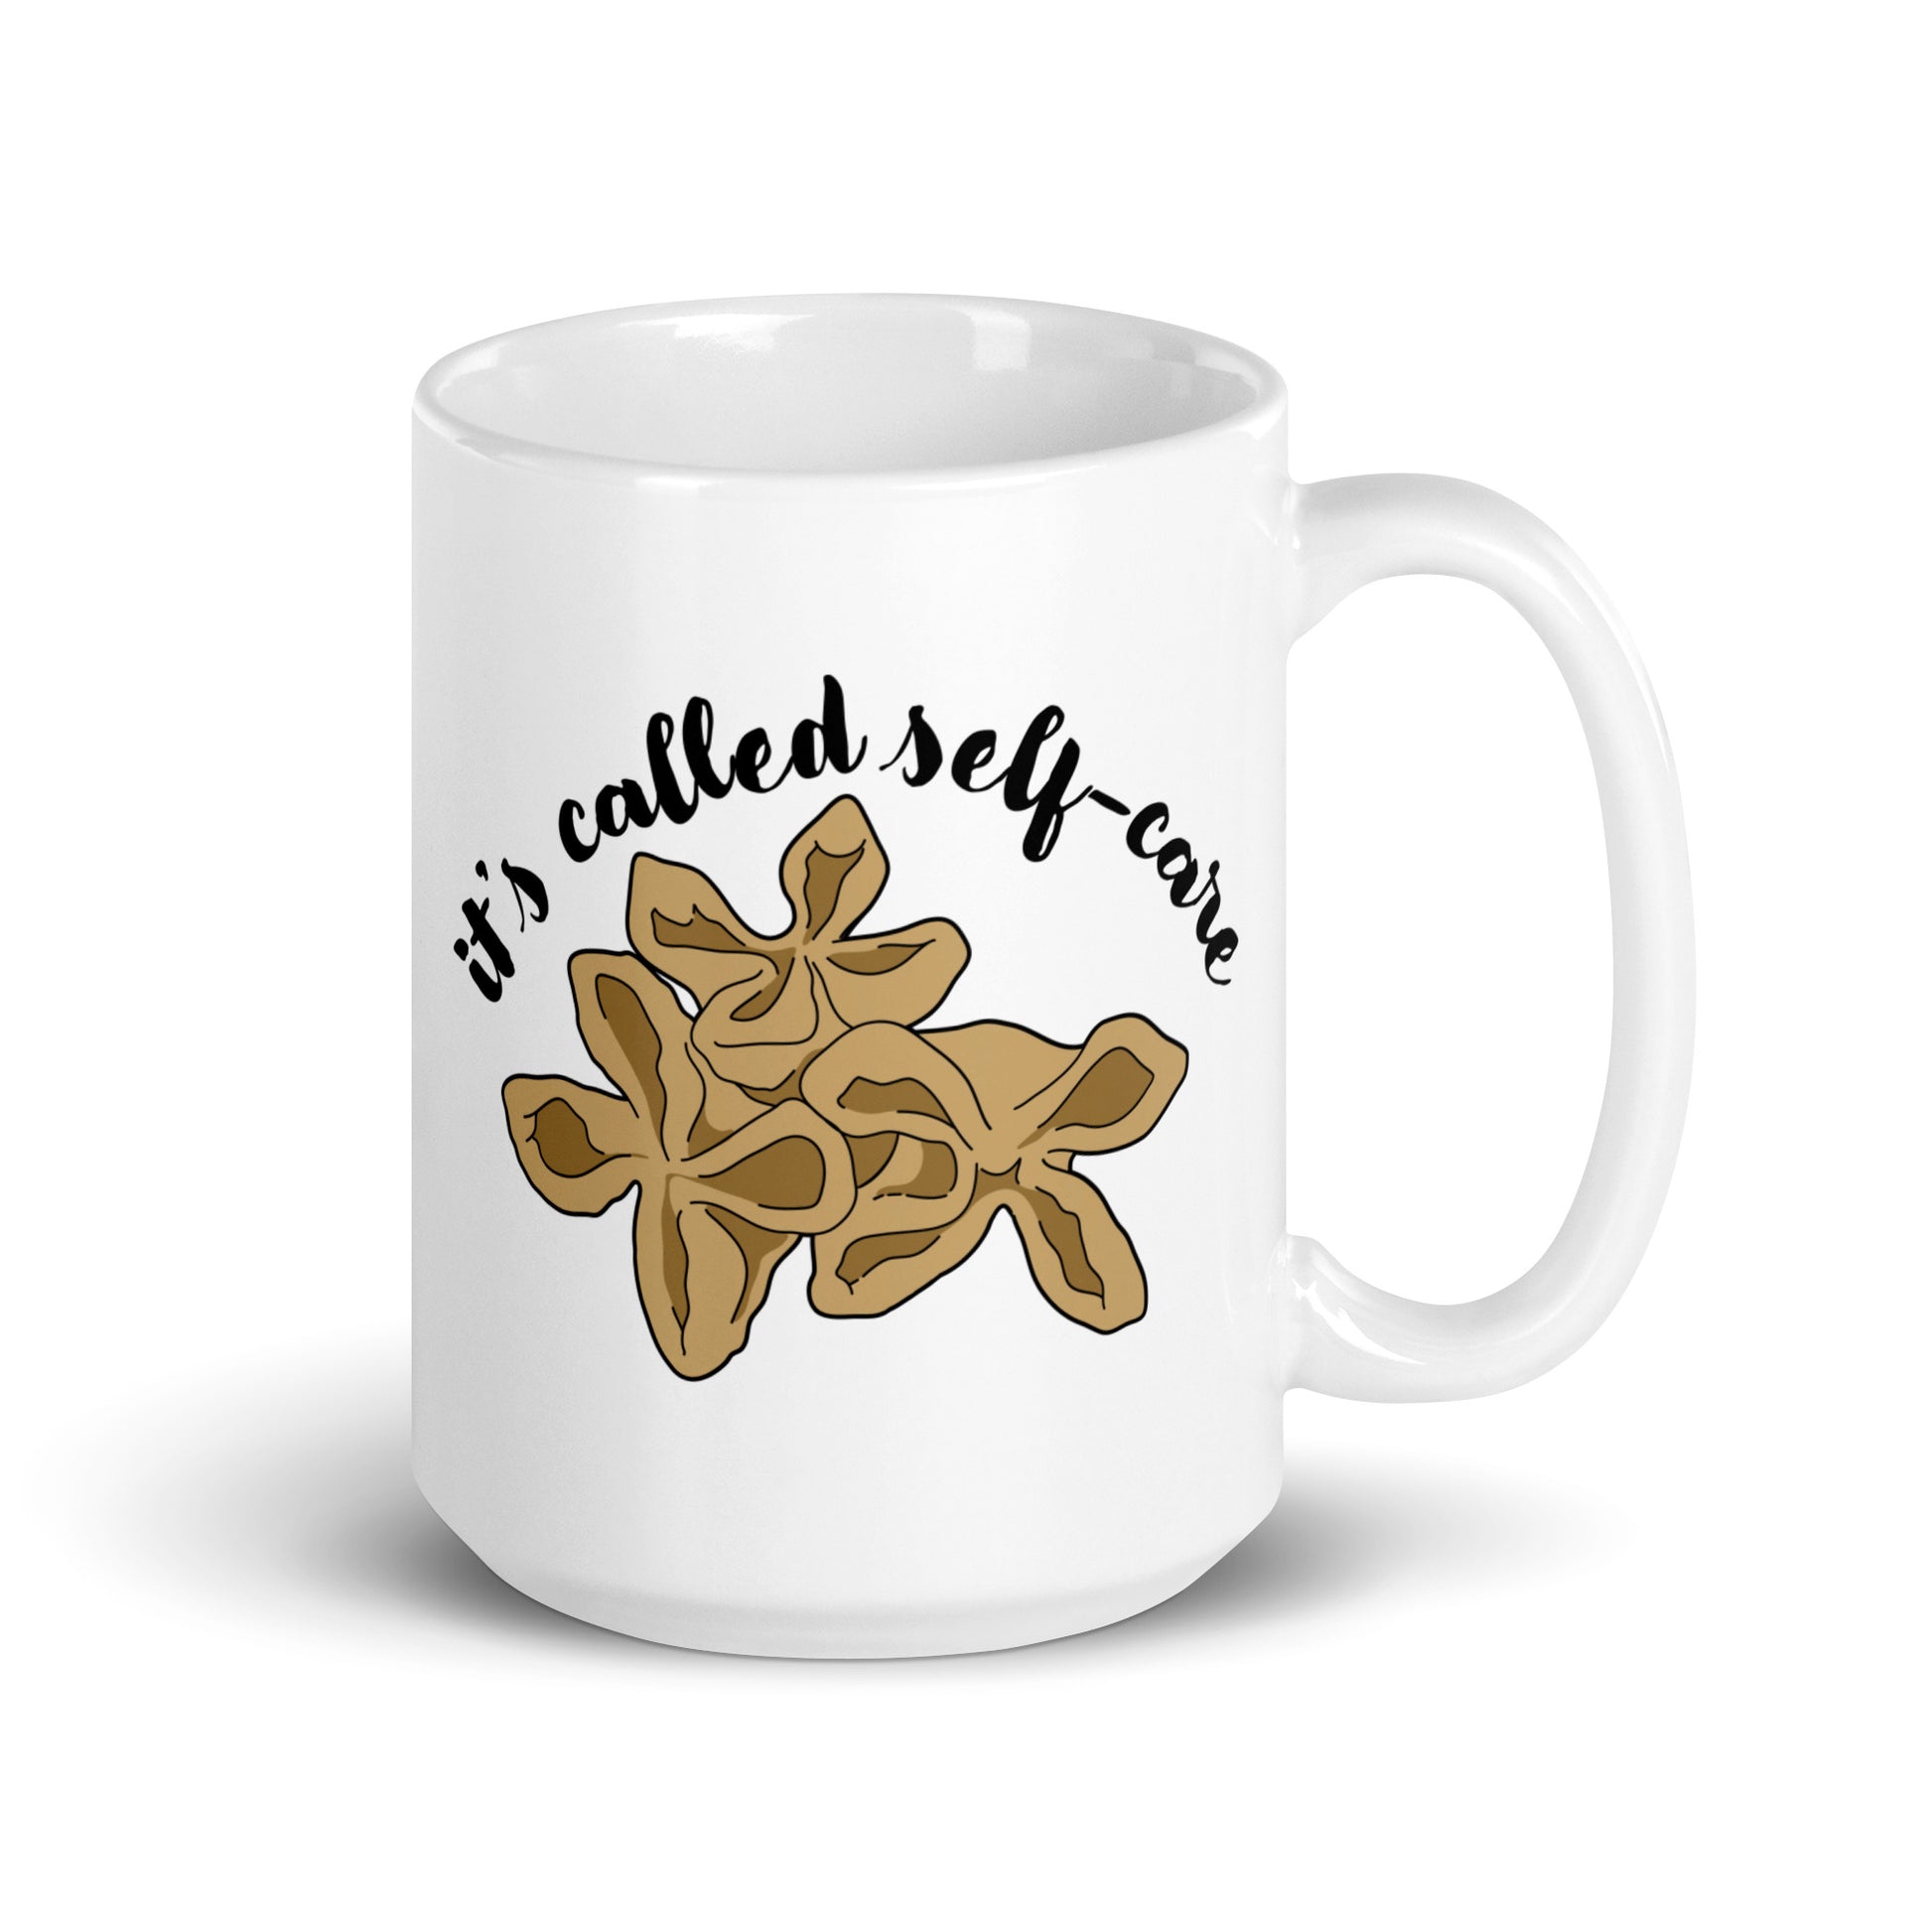 A white, 15 ounce ceramic mug featuring an illustration of three pieces of crab rangoon. Text in an arc above the crab rangoon reads "it's called self-care" in a cursive script.